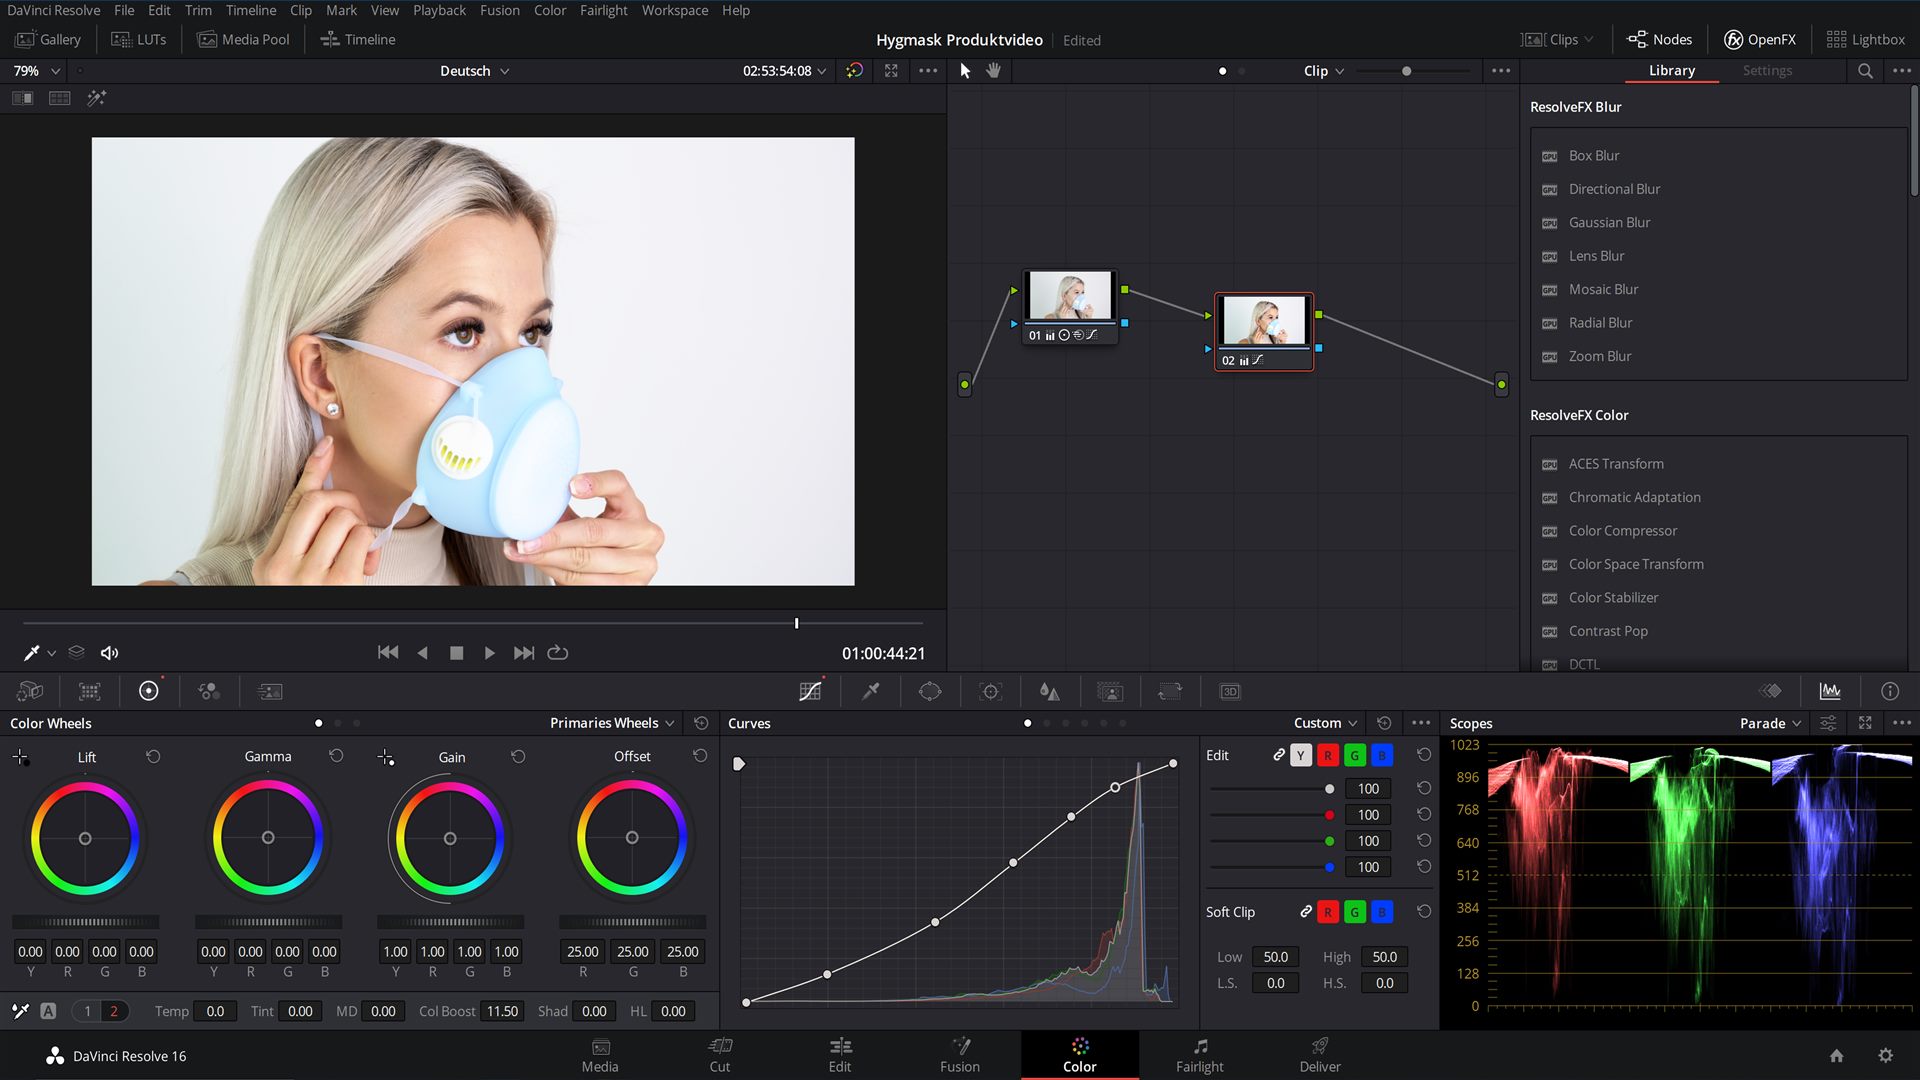 A screen shot of a video editor with a woman wearing a Hygmask.